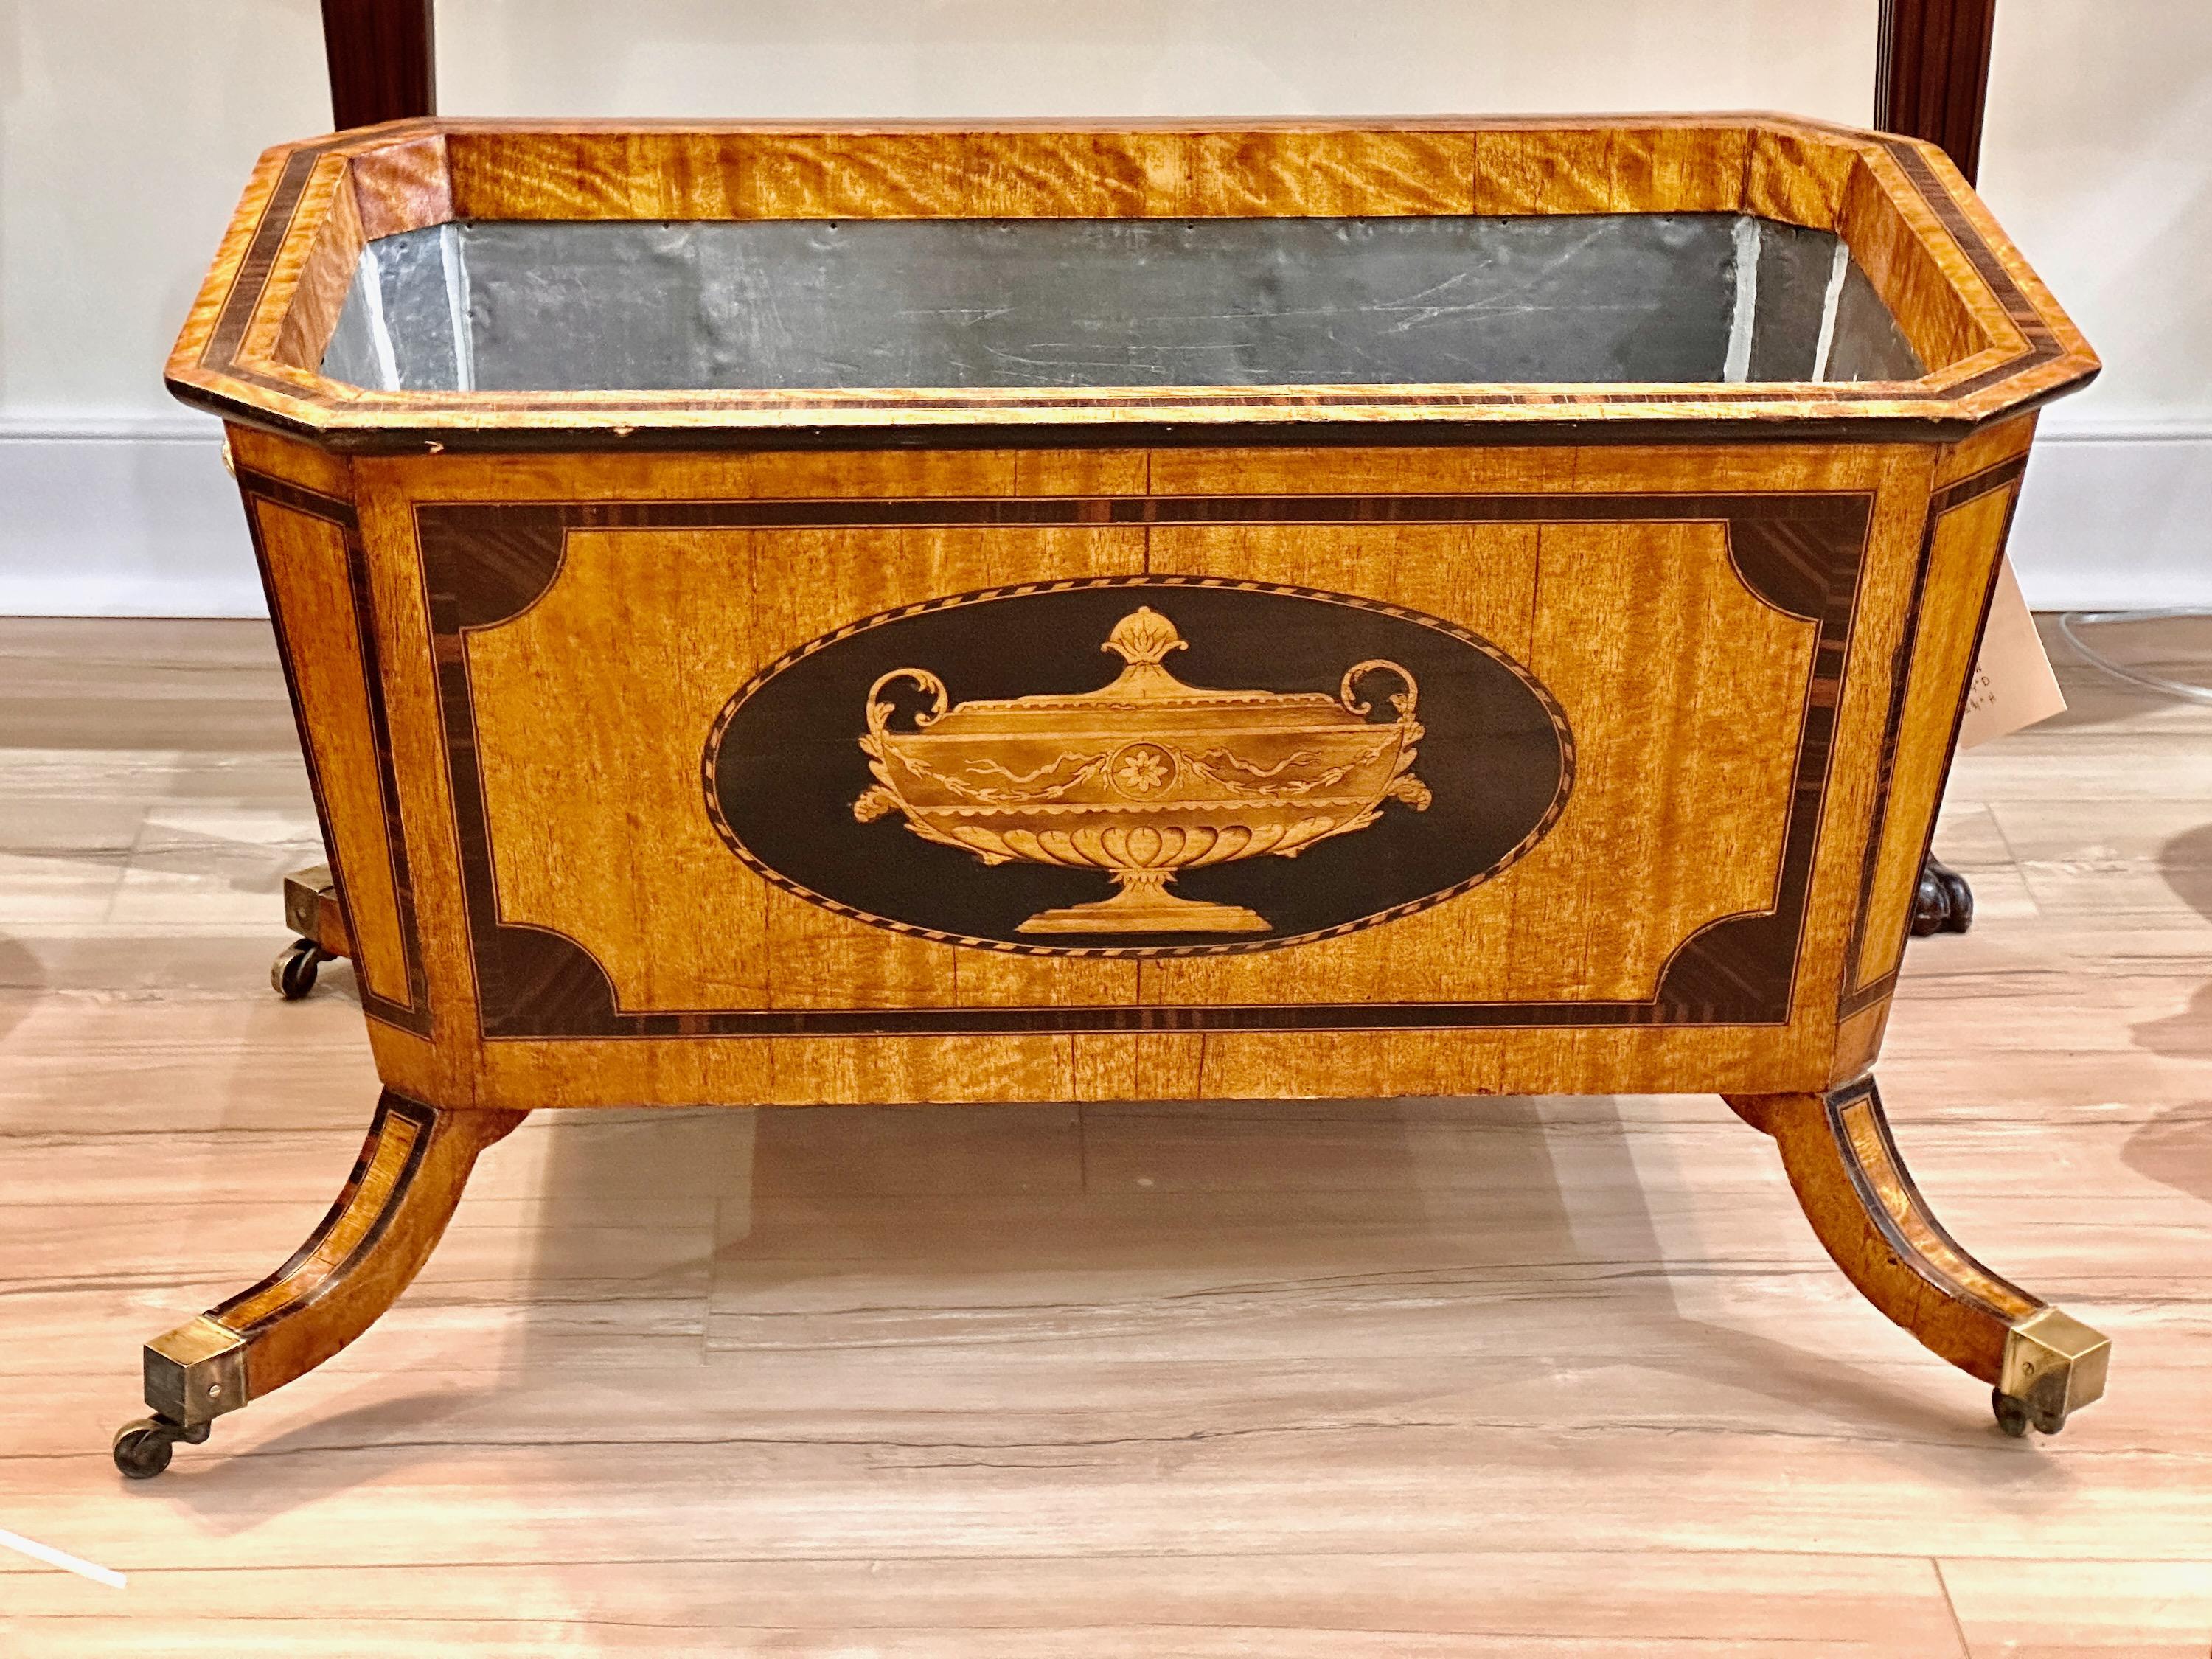 An early 20th century English Edwardian Regency style mahogany and satinwood zinc lined wine cooler or planter resting on splayed legs terminating in brass casters with large brass handles on either end.